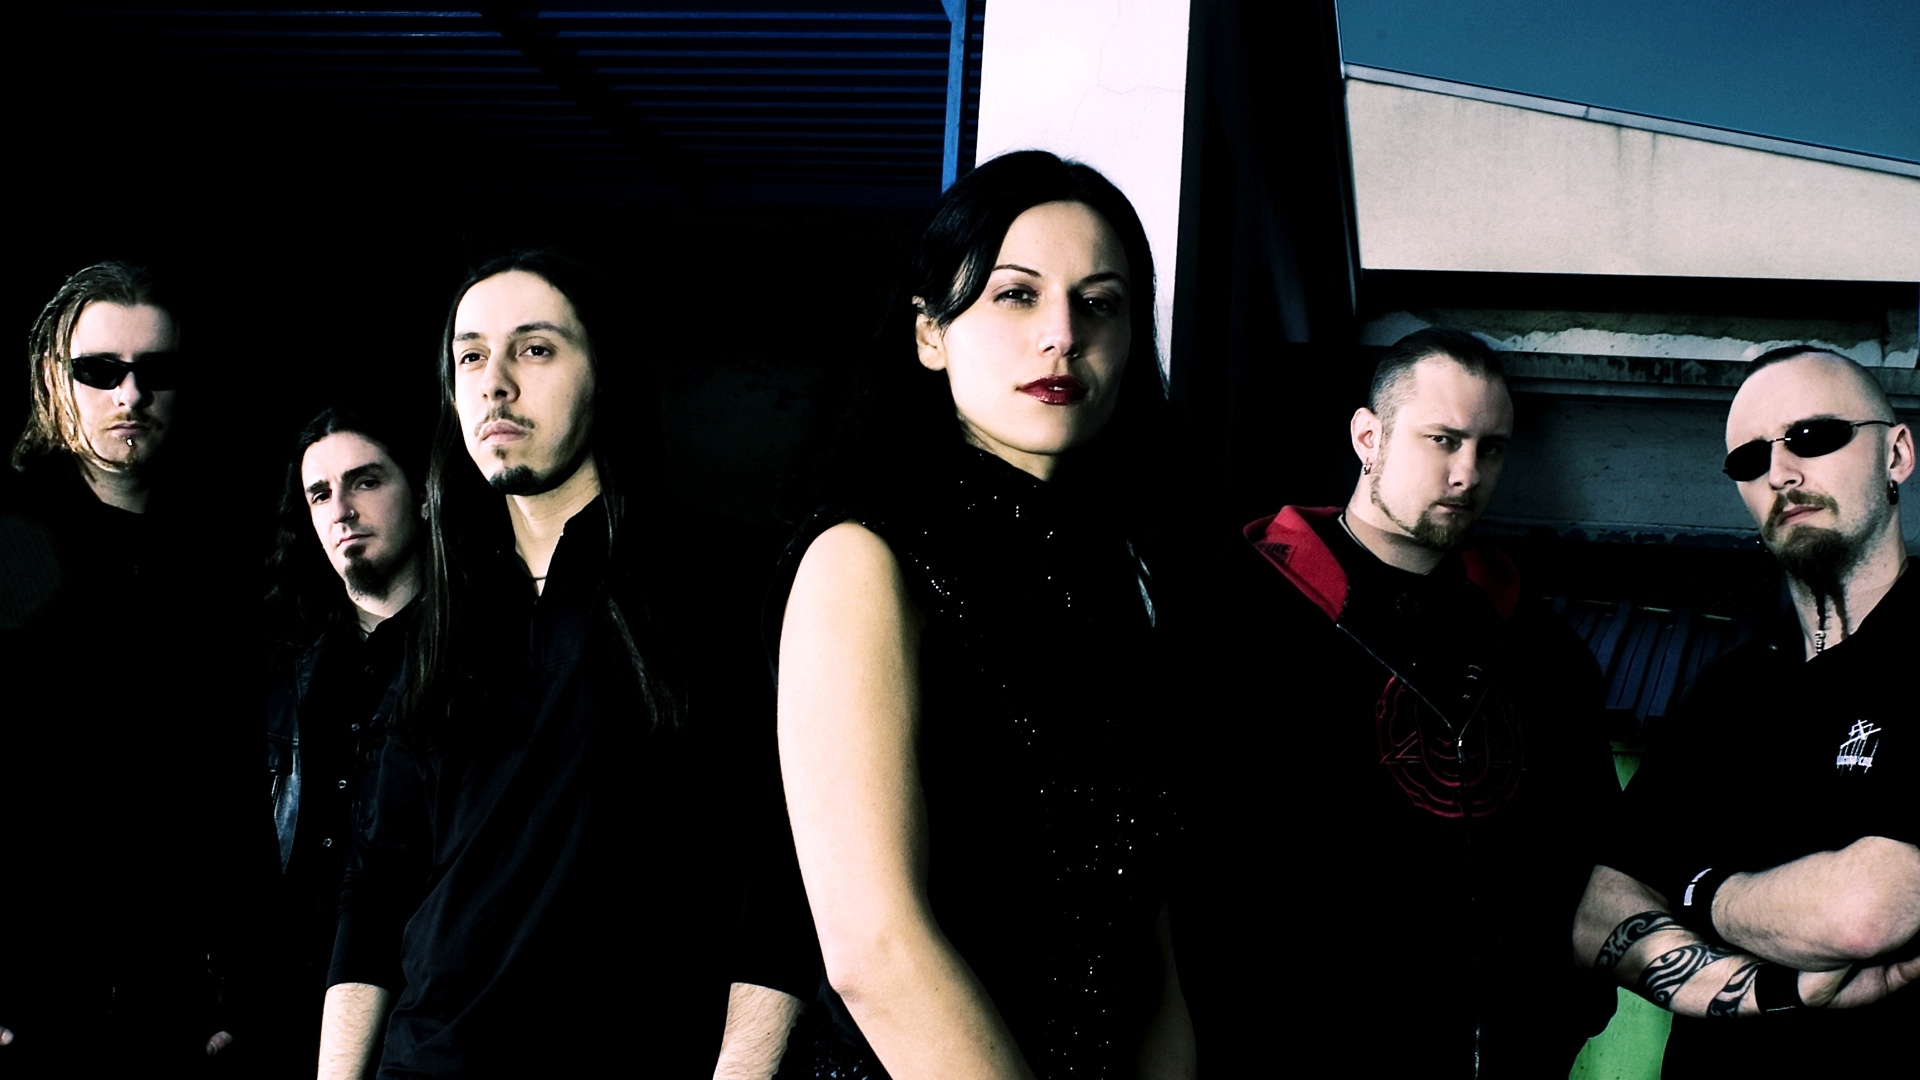 Lacuna Coil wallpaper, Gothic beauty, Captivating frontwoman, Melodic metal, 1920x1080 Full HD Desktop